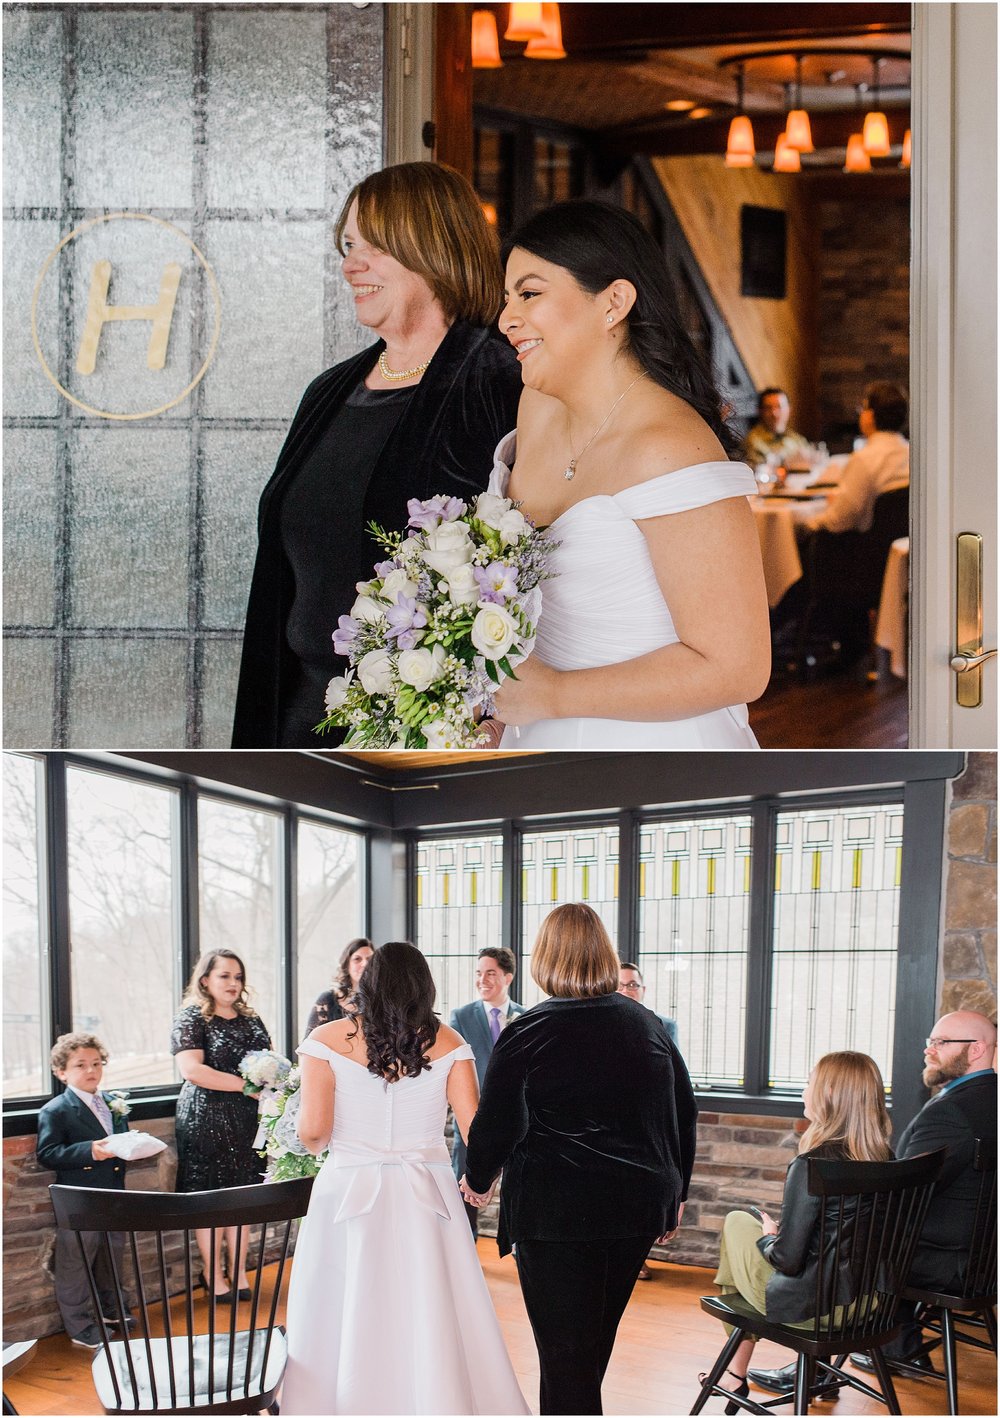 bride walking into wedding ceremony space with her Mom and seeing her groom for the first time for their intimate wedding ceremony, elopement